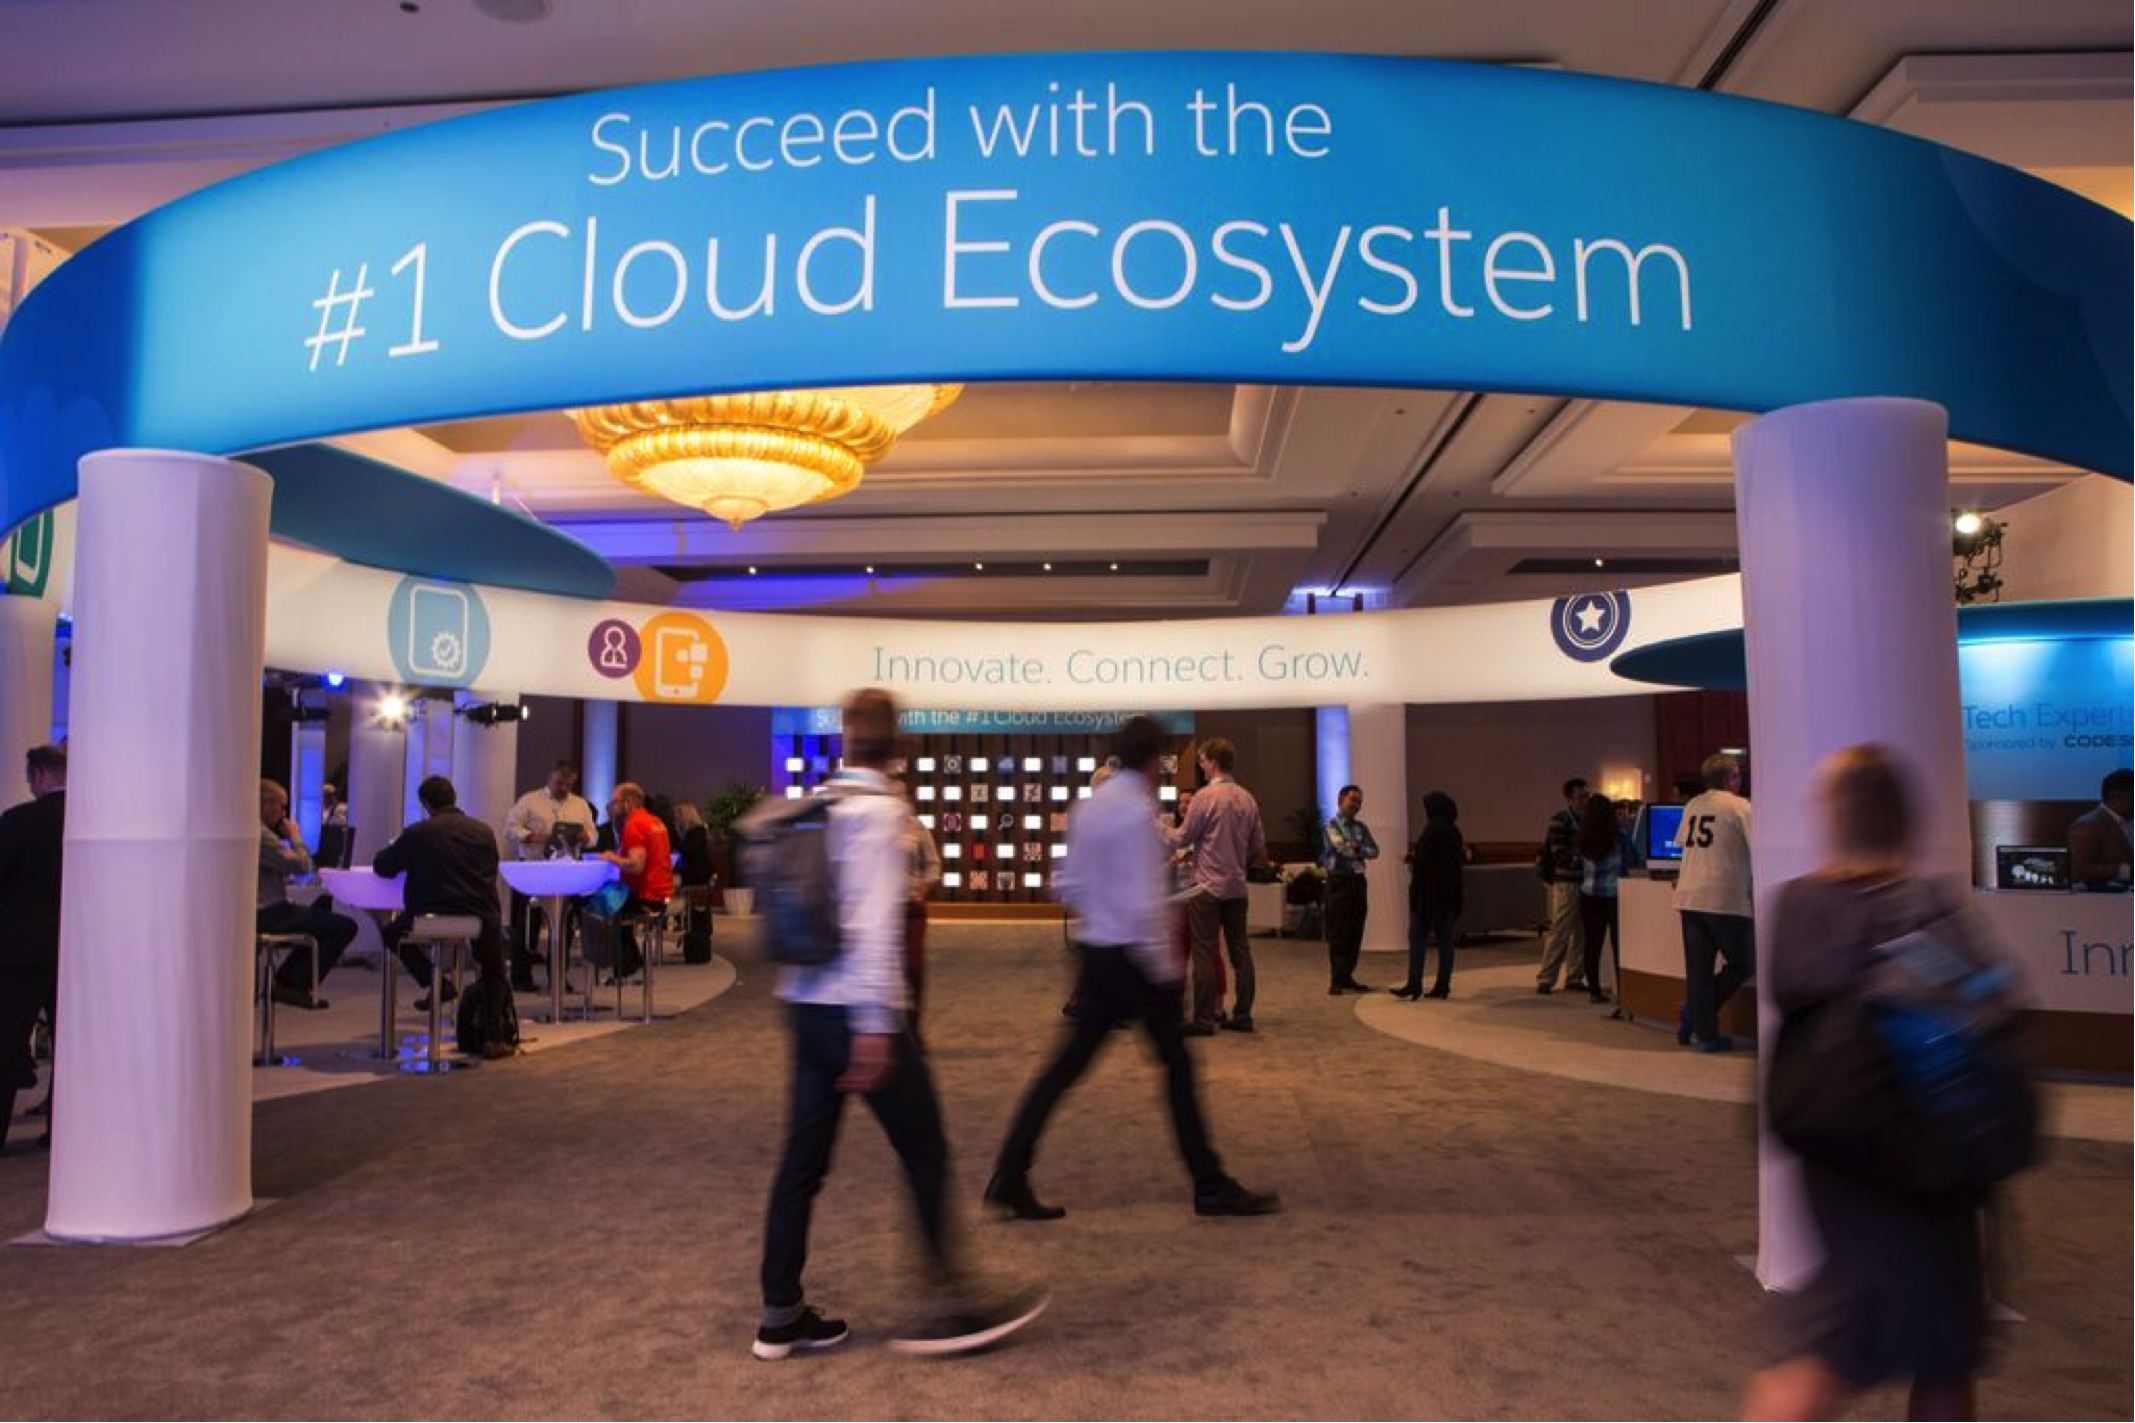 New Partner Resources, Momentum, and Giving Back Take Center Stage at Dreamforce ‘15